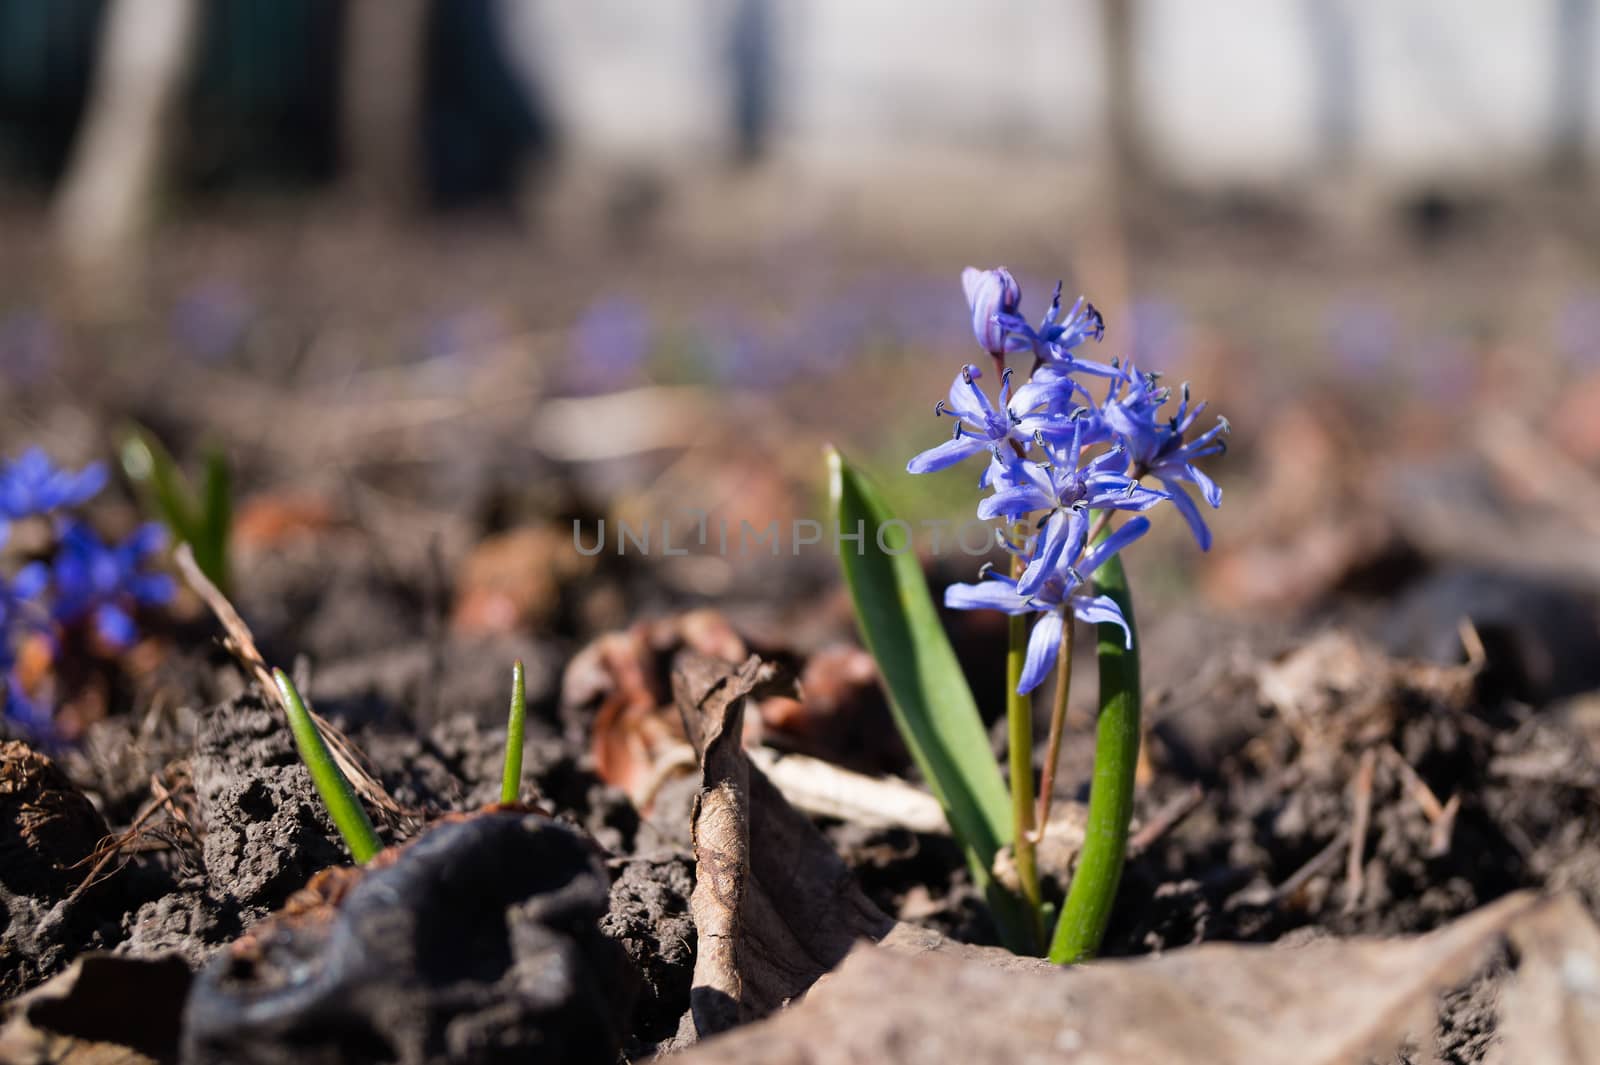 Bluebell flowers in the spring garden close up. Background is brurred. by alexsdriver